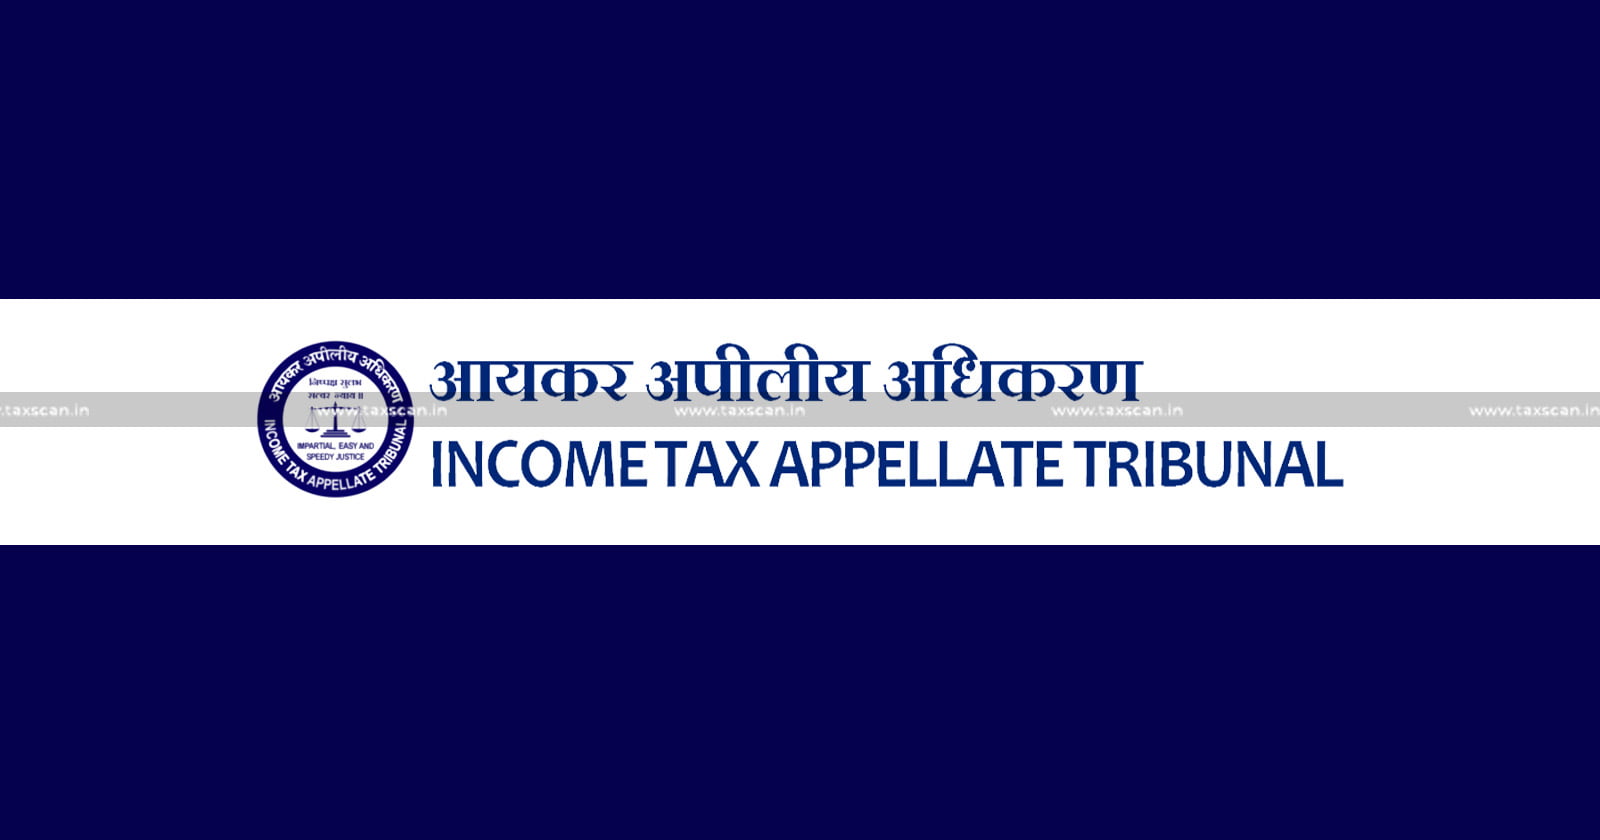 Competent Authority Approval - Form No. 3CM - Deduction - R & D Expenditure - Income Tax Act - ITAT - taxscan